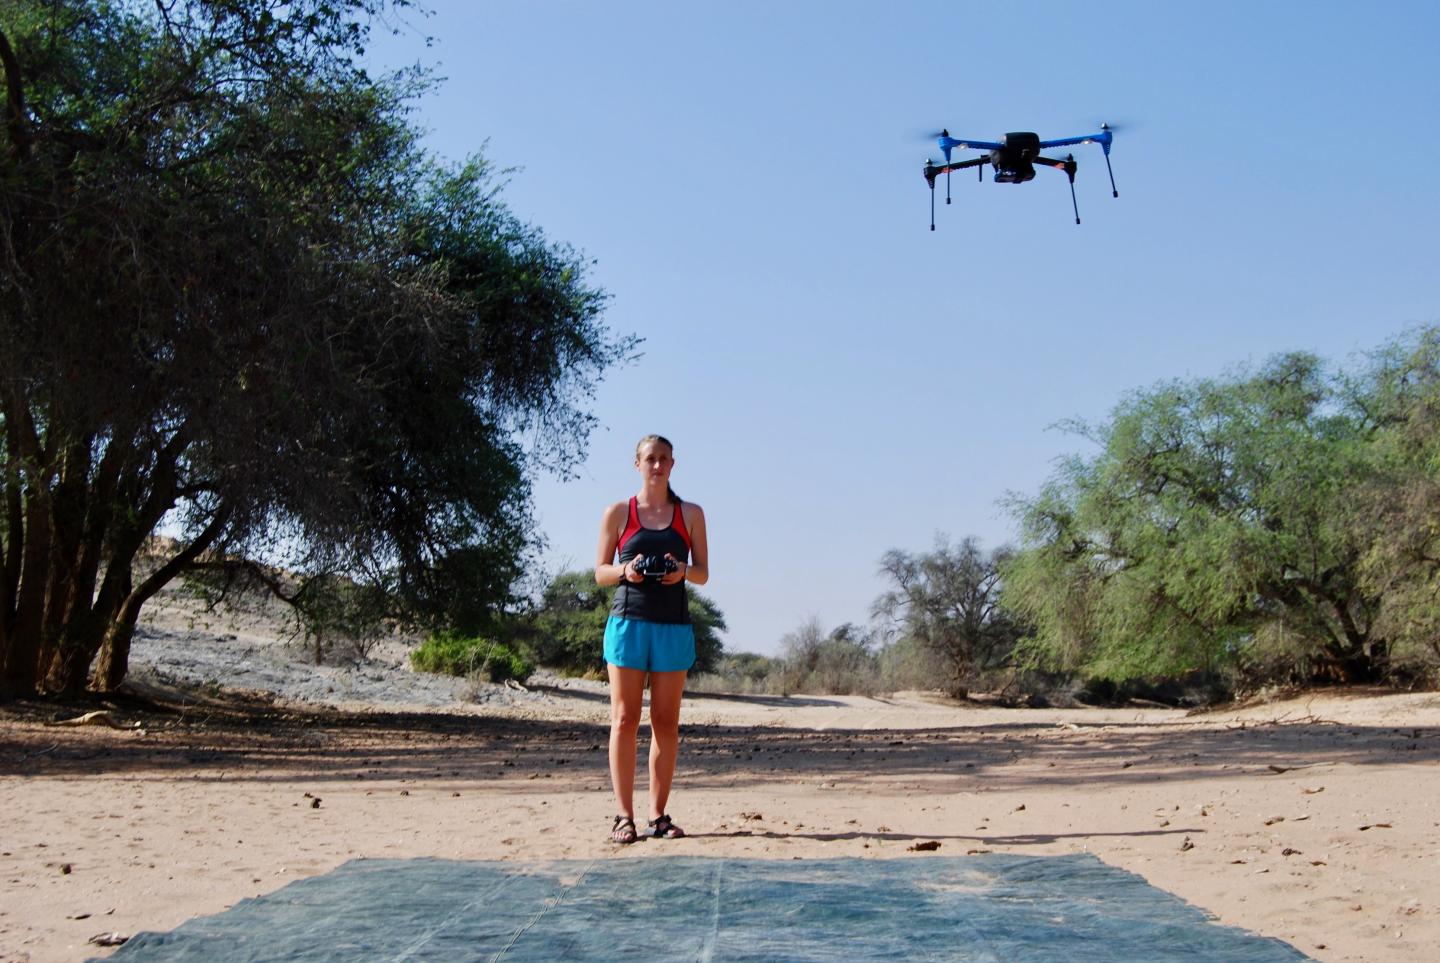 Bryn Morgan flying a drone for a research project on the Kuiseb River in the Namib Desert.